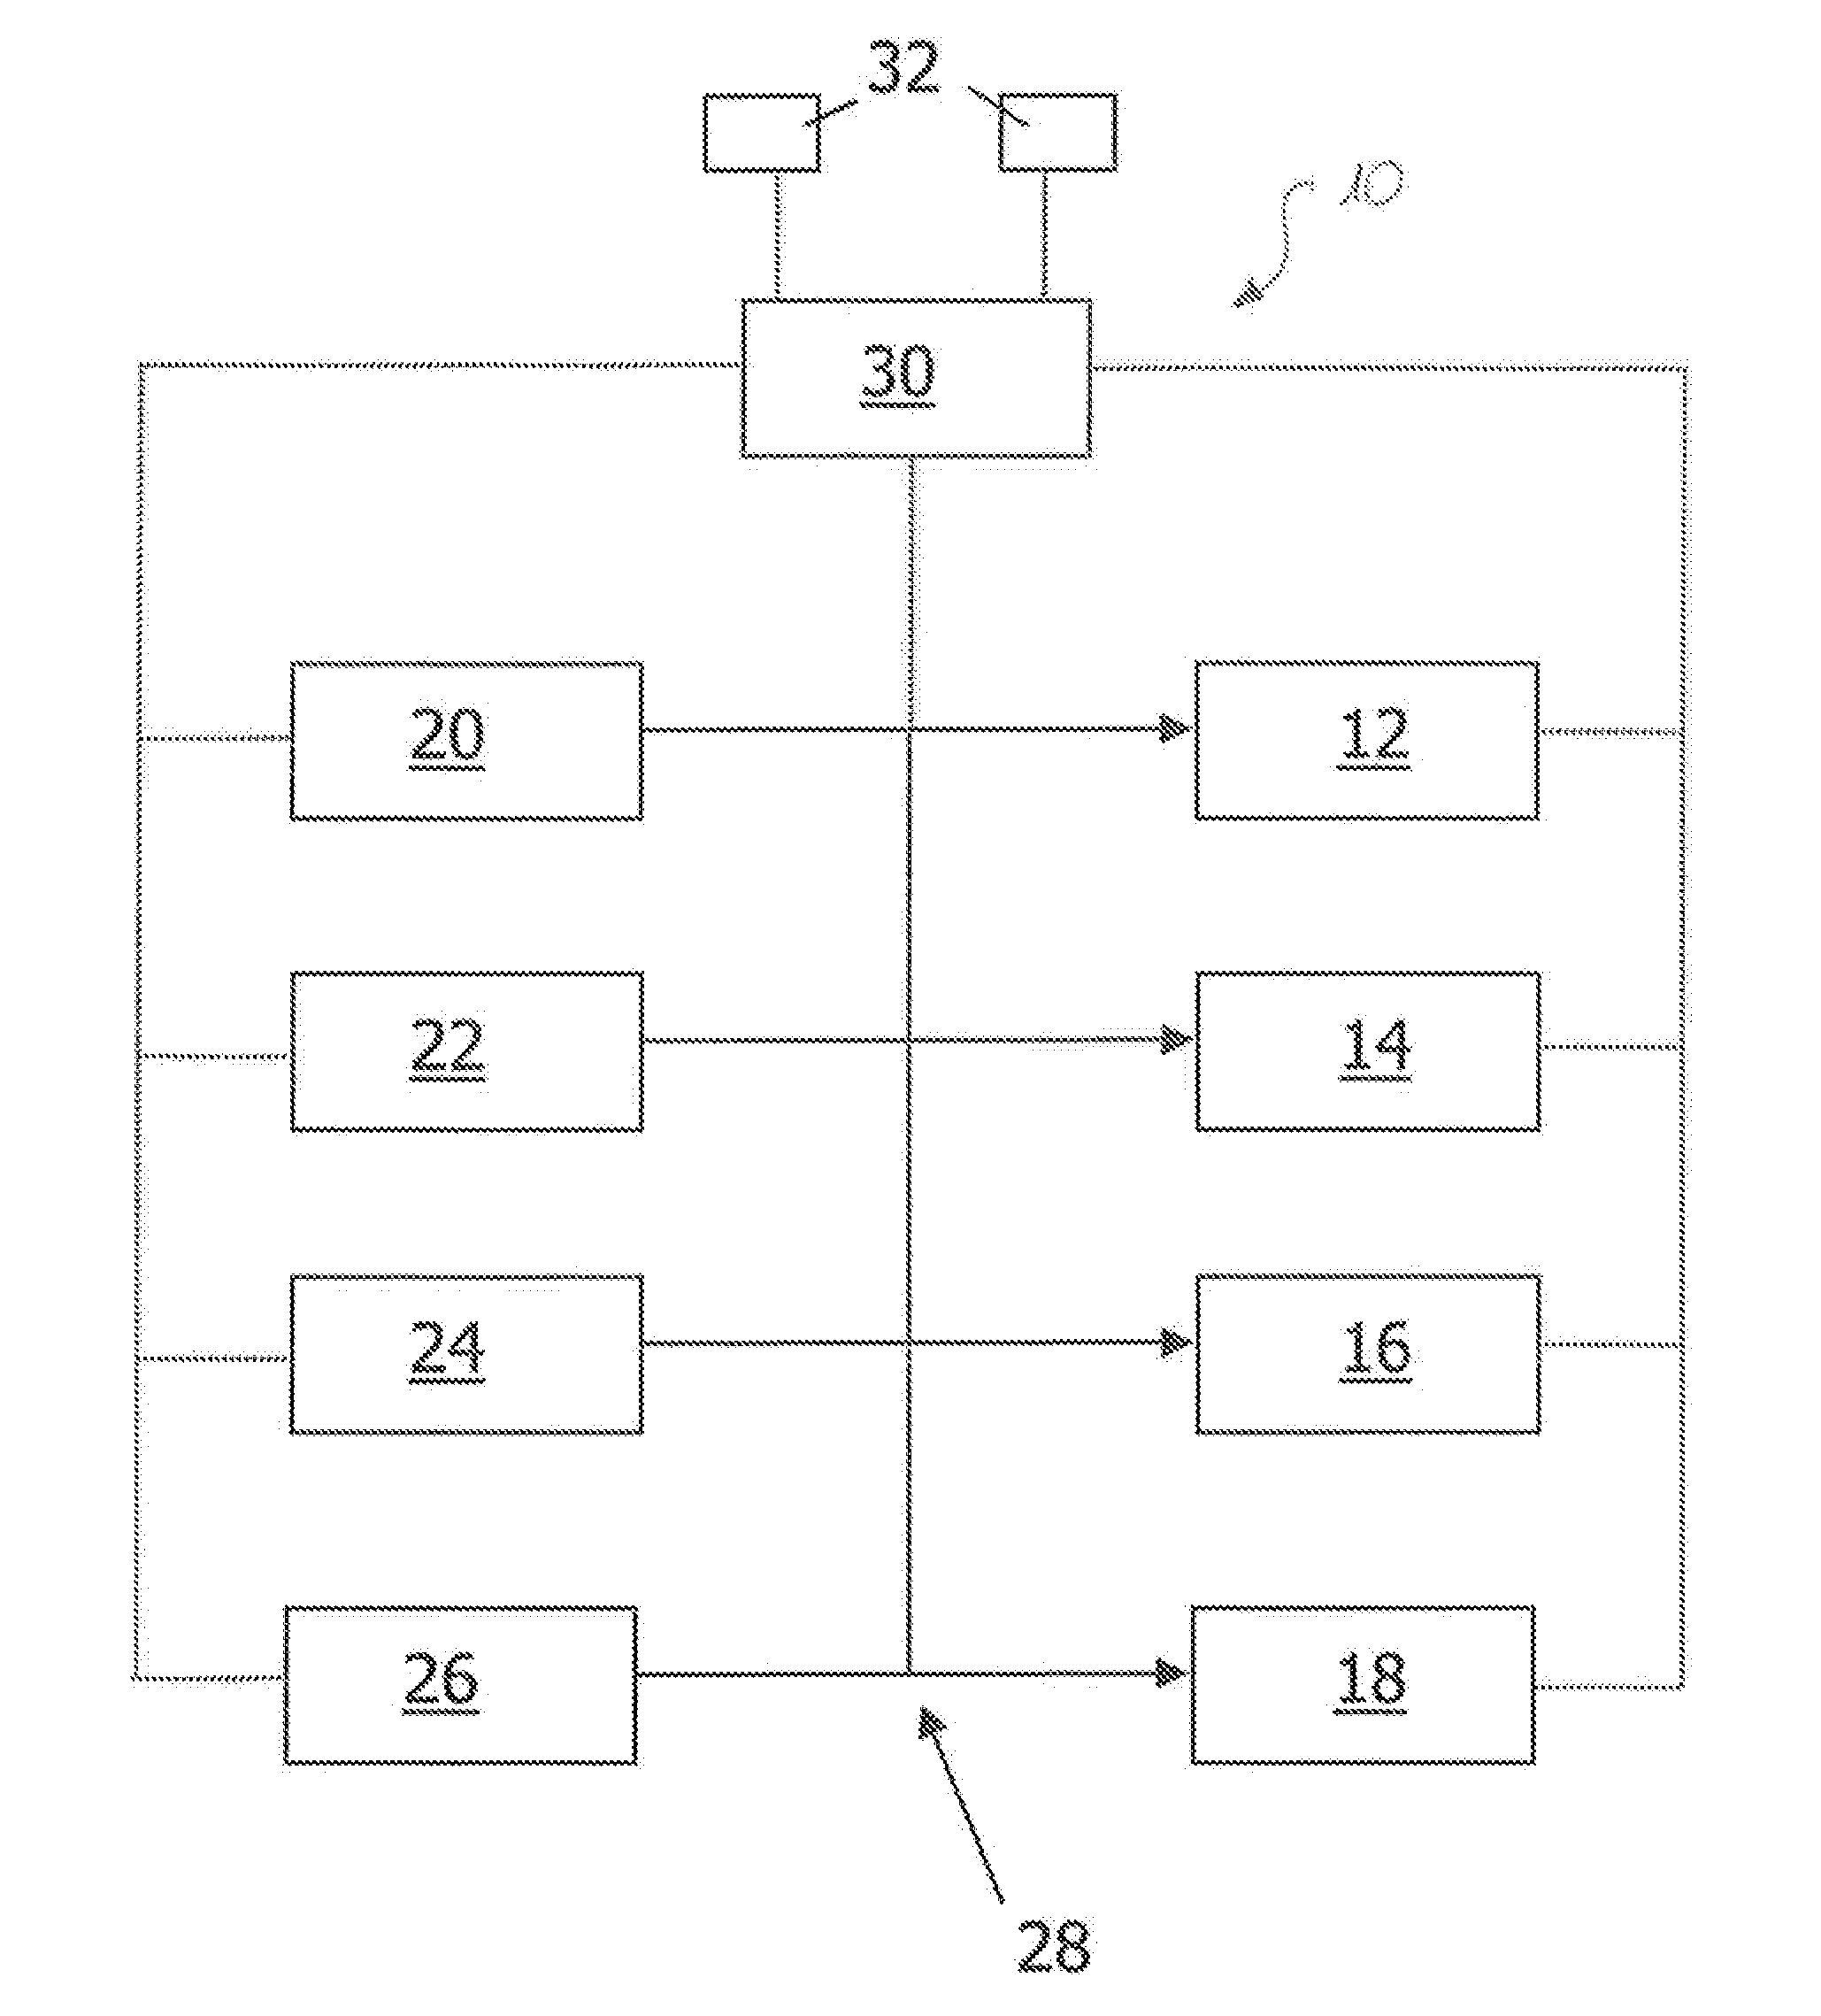 System and method for cooling and/or heating aircraft devices